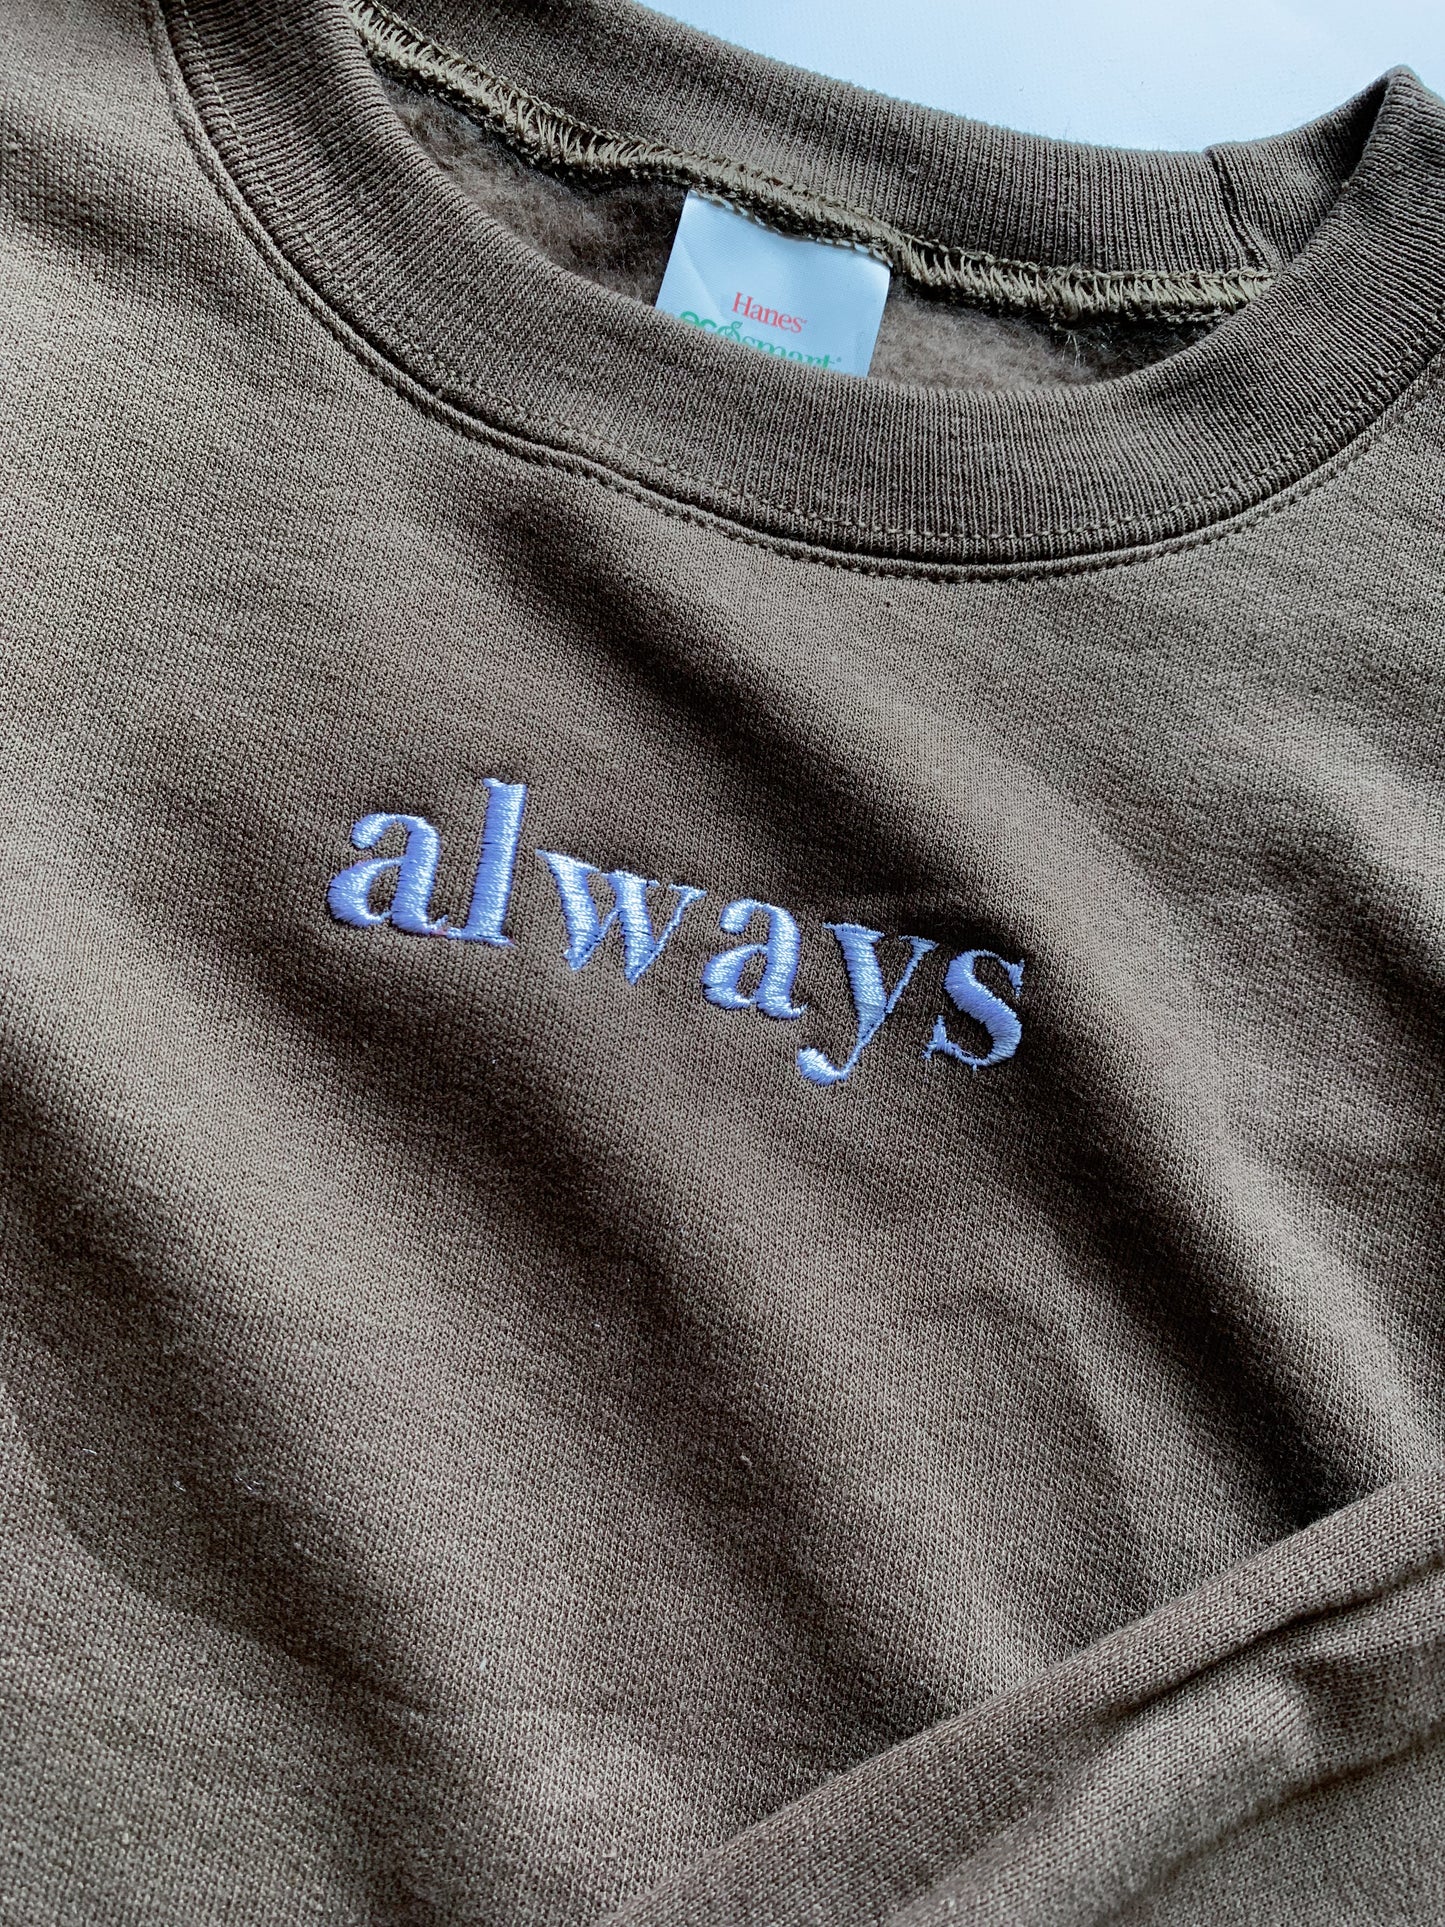 "Love" "Always" Embroidered Matching Set